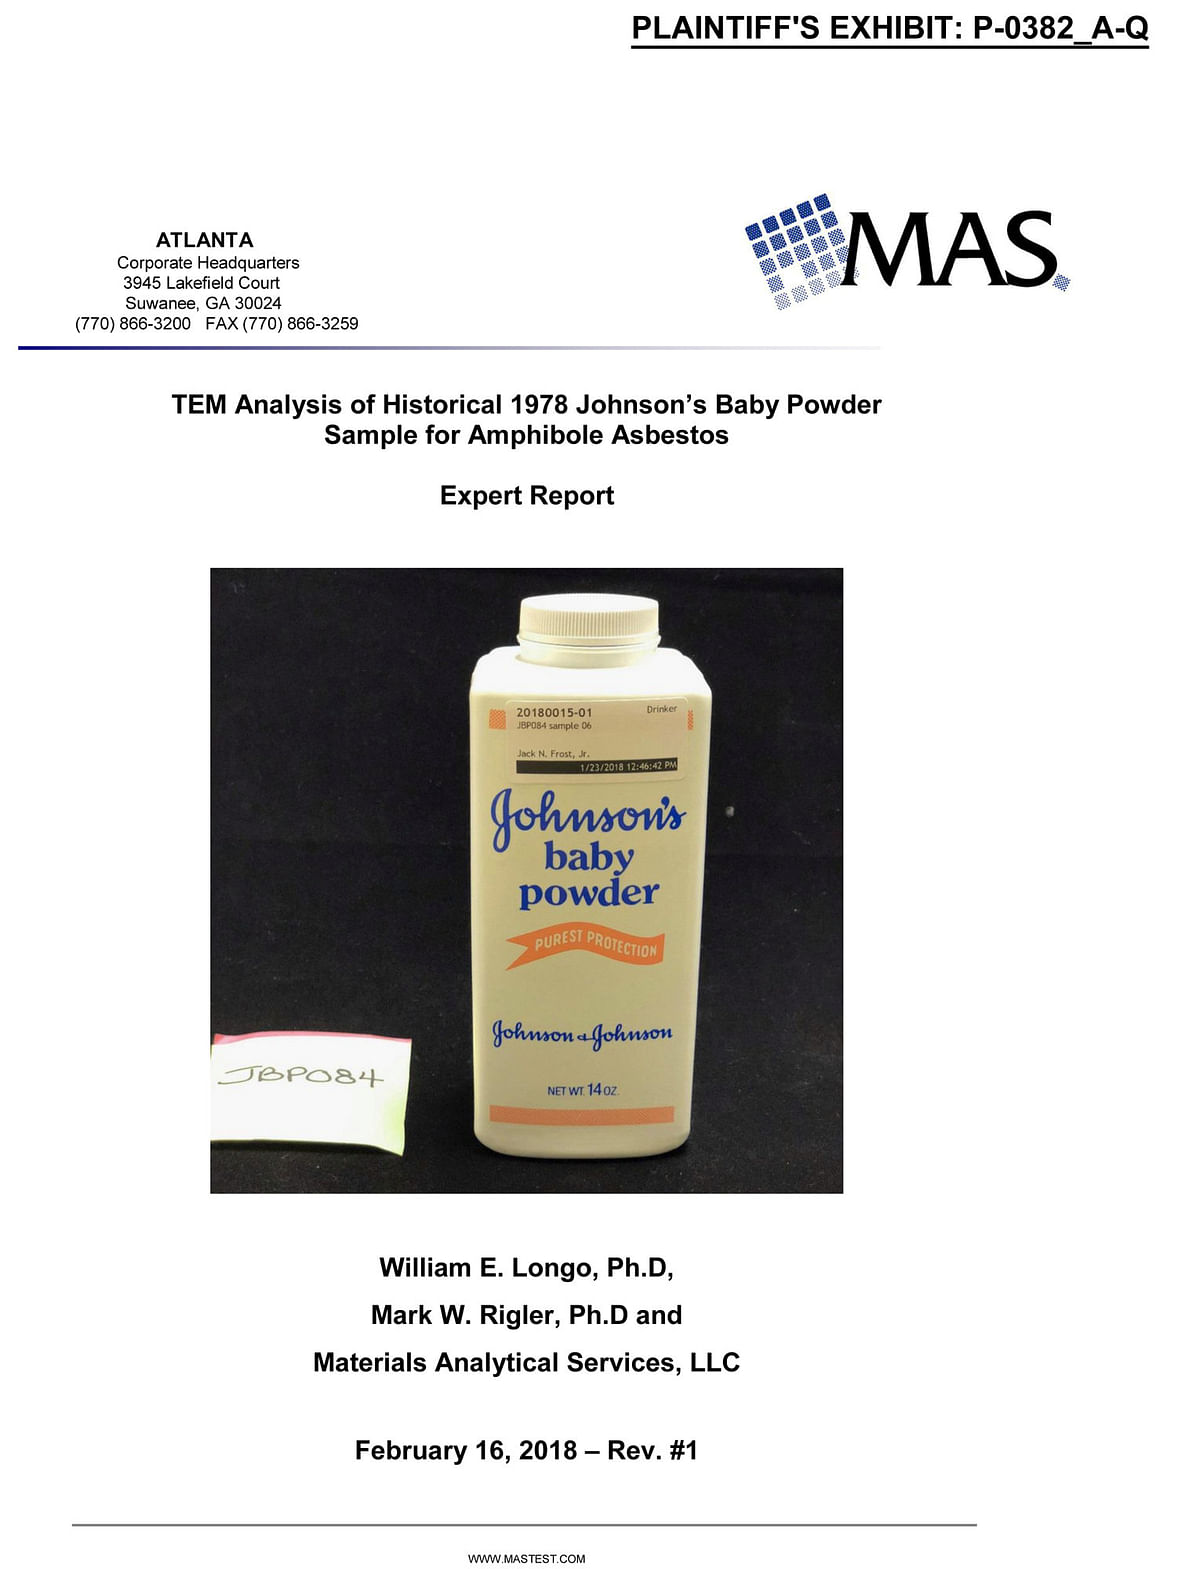 The front page of a report analyzing a sample of Johnson`s Baby Powder from 1978, entered in court as a plaintiff`s exhibit in a case against Johnson&Johnson, is pictured in this undated handout photo obtained by Reuters on 9 November. Photo: Reuters